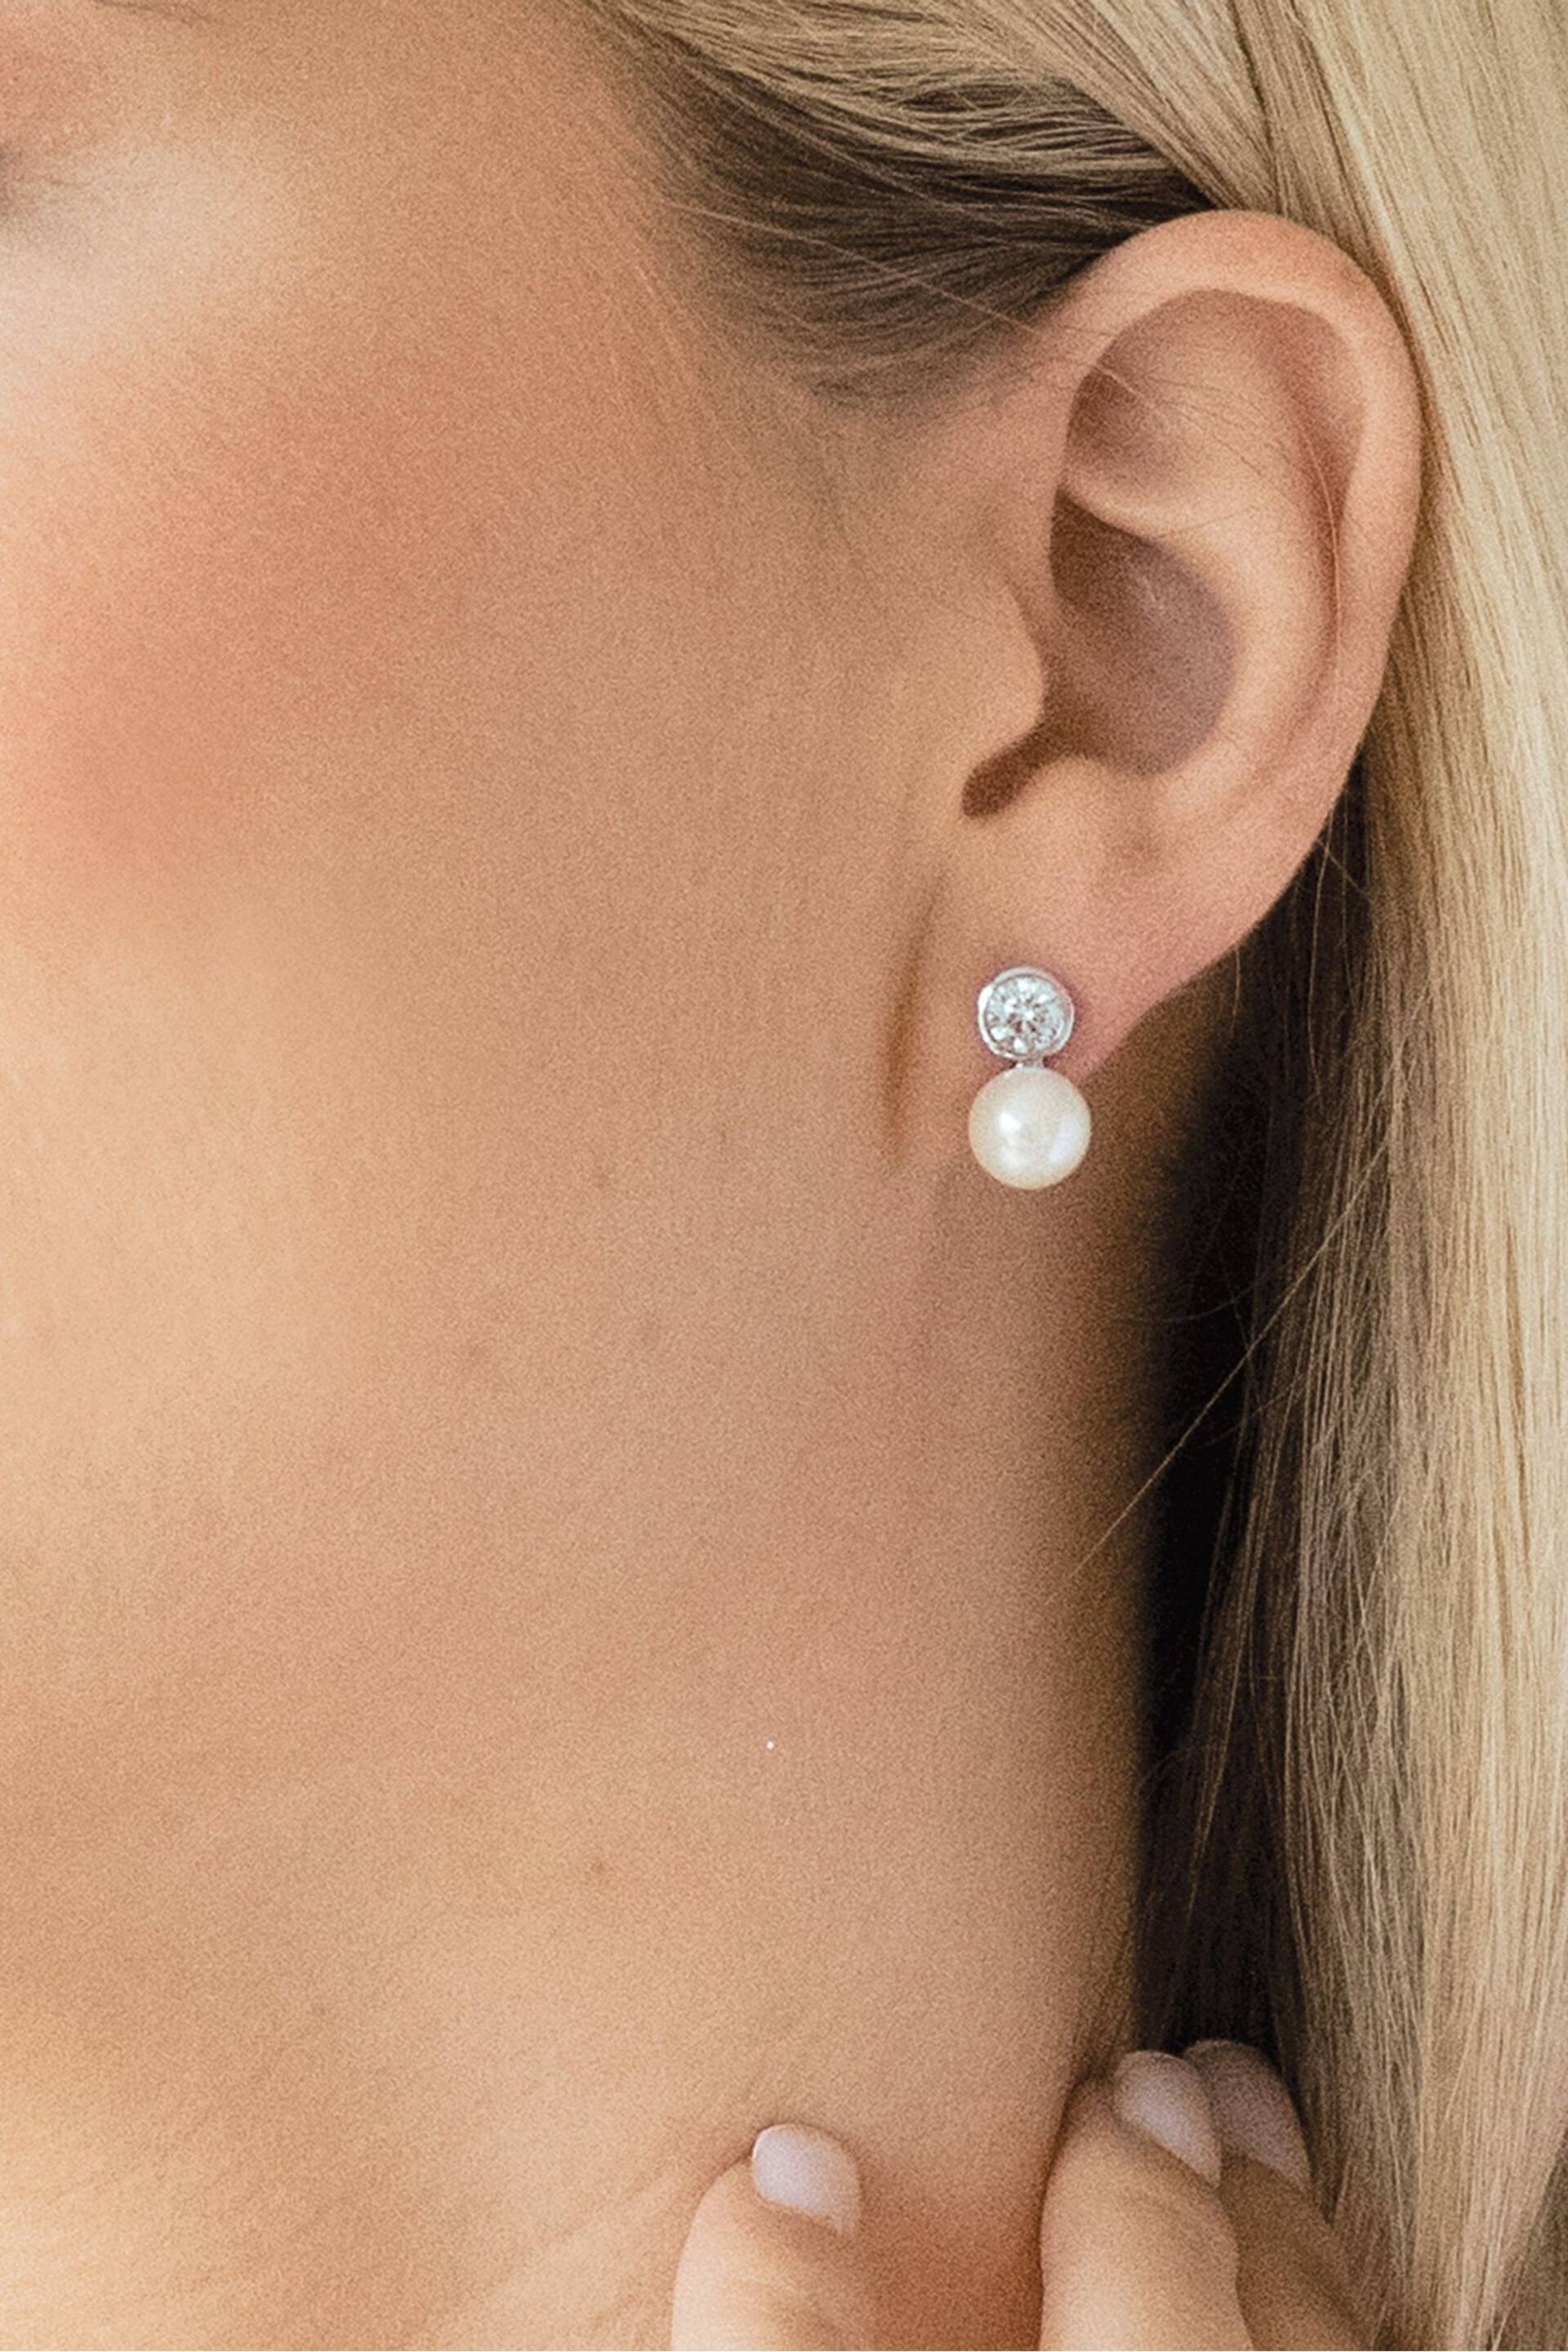 Ivory & Co Silver Portland Solitaire Crystal And Pearl Earrings - Image 3 of 5